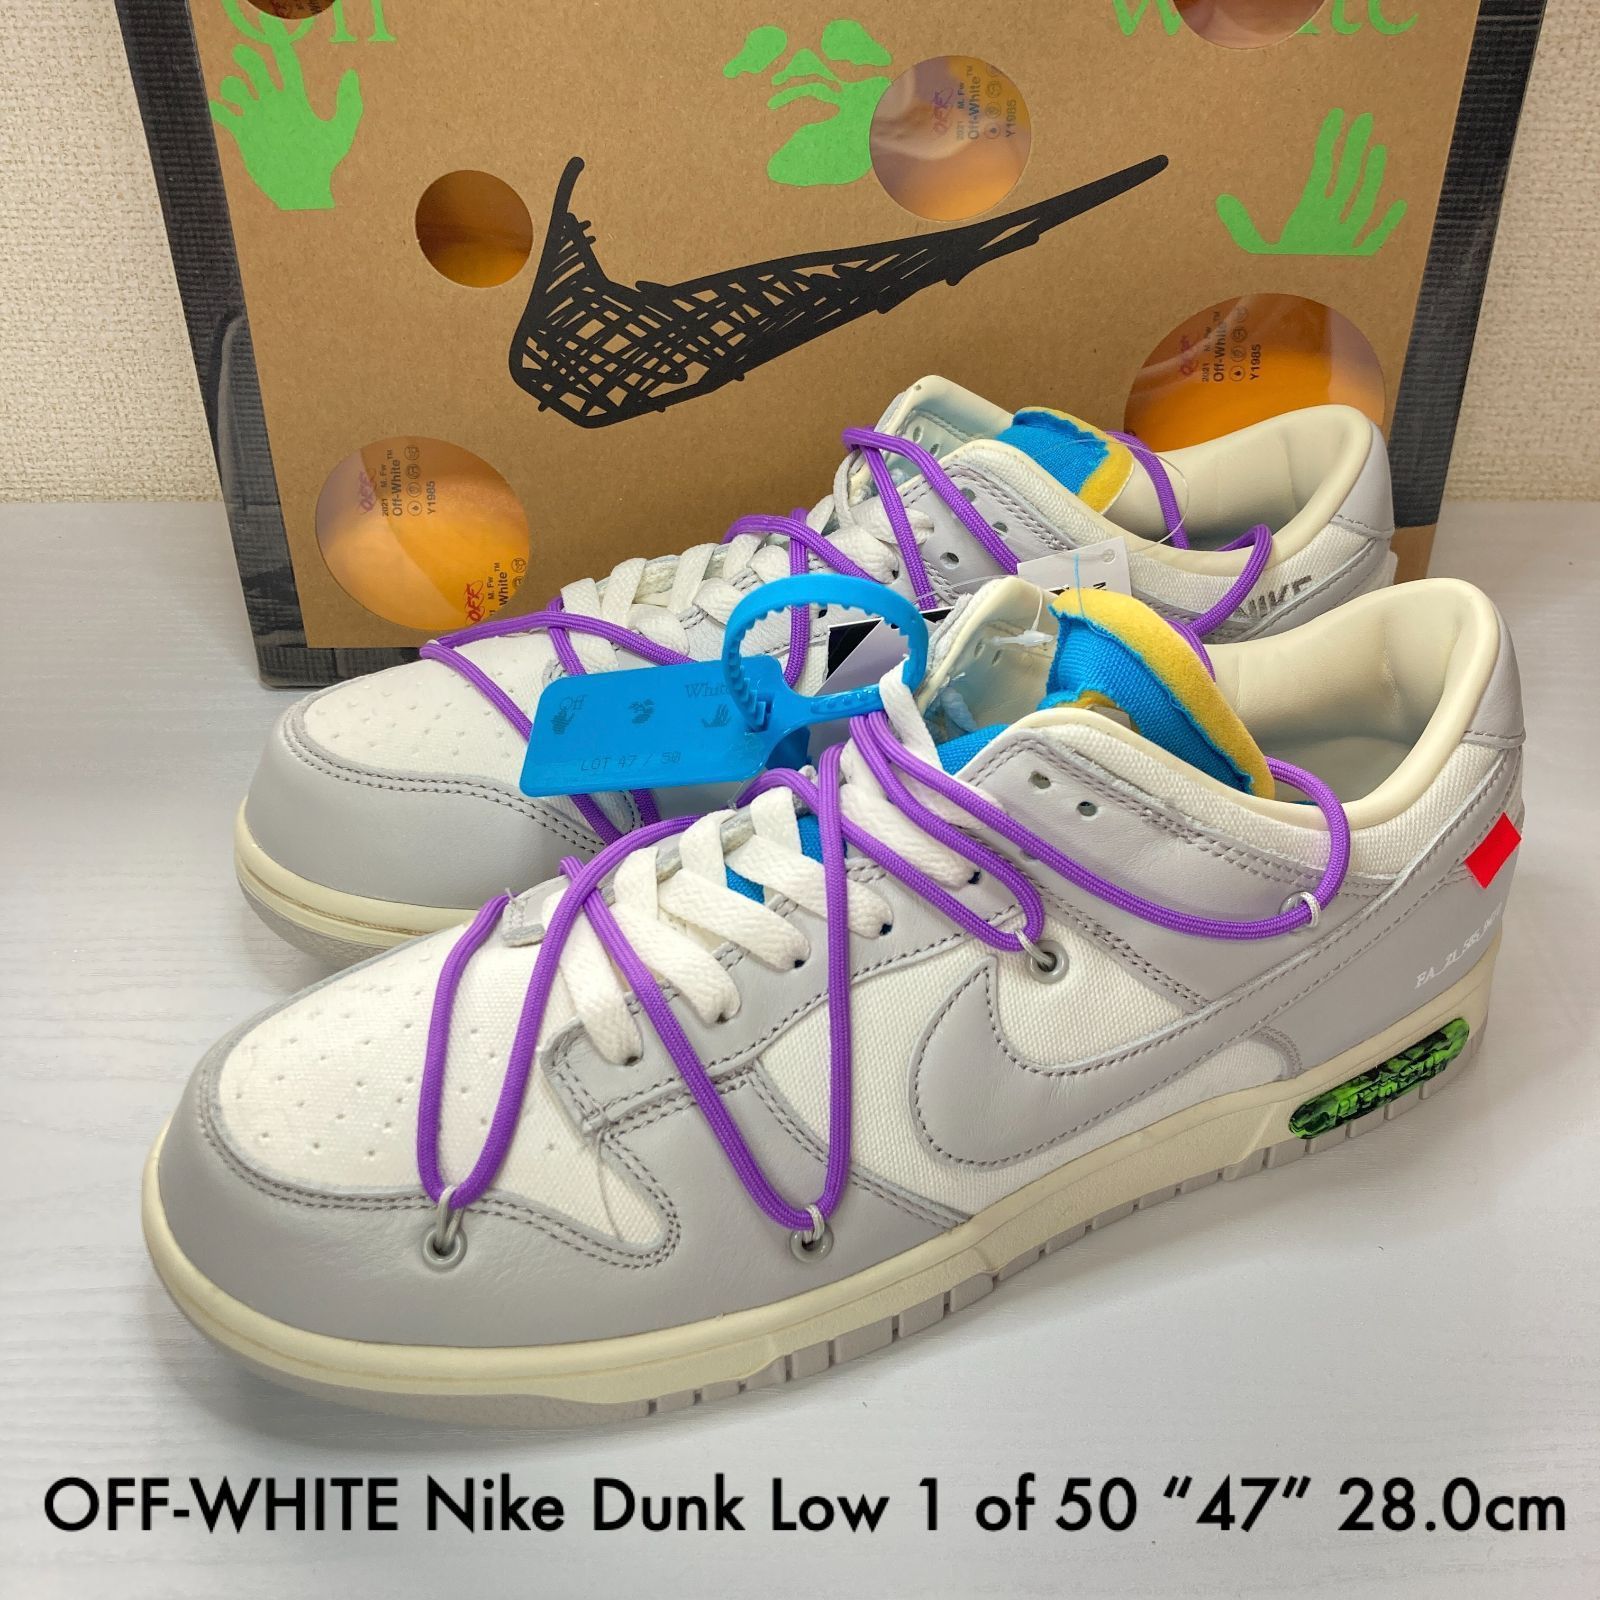 off-white Nike dunk low 47